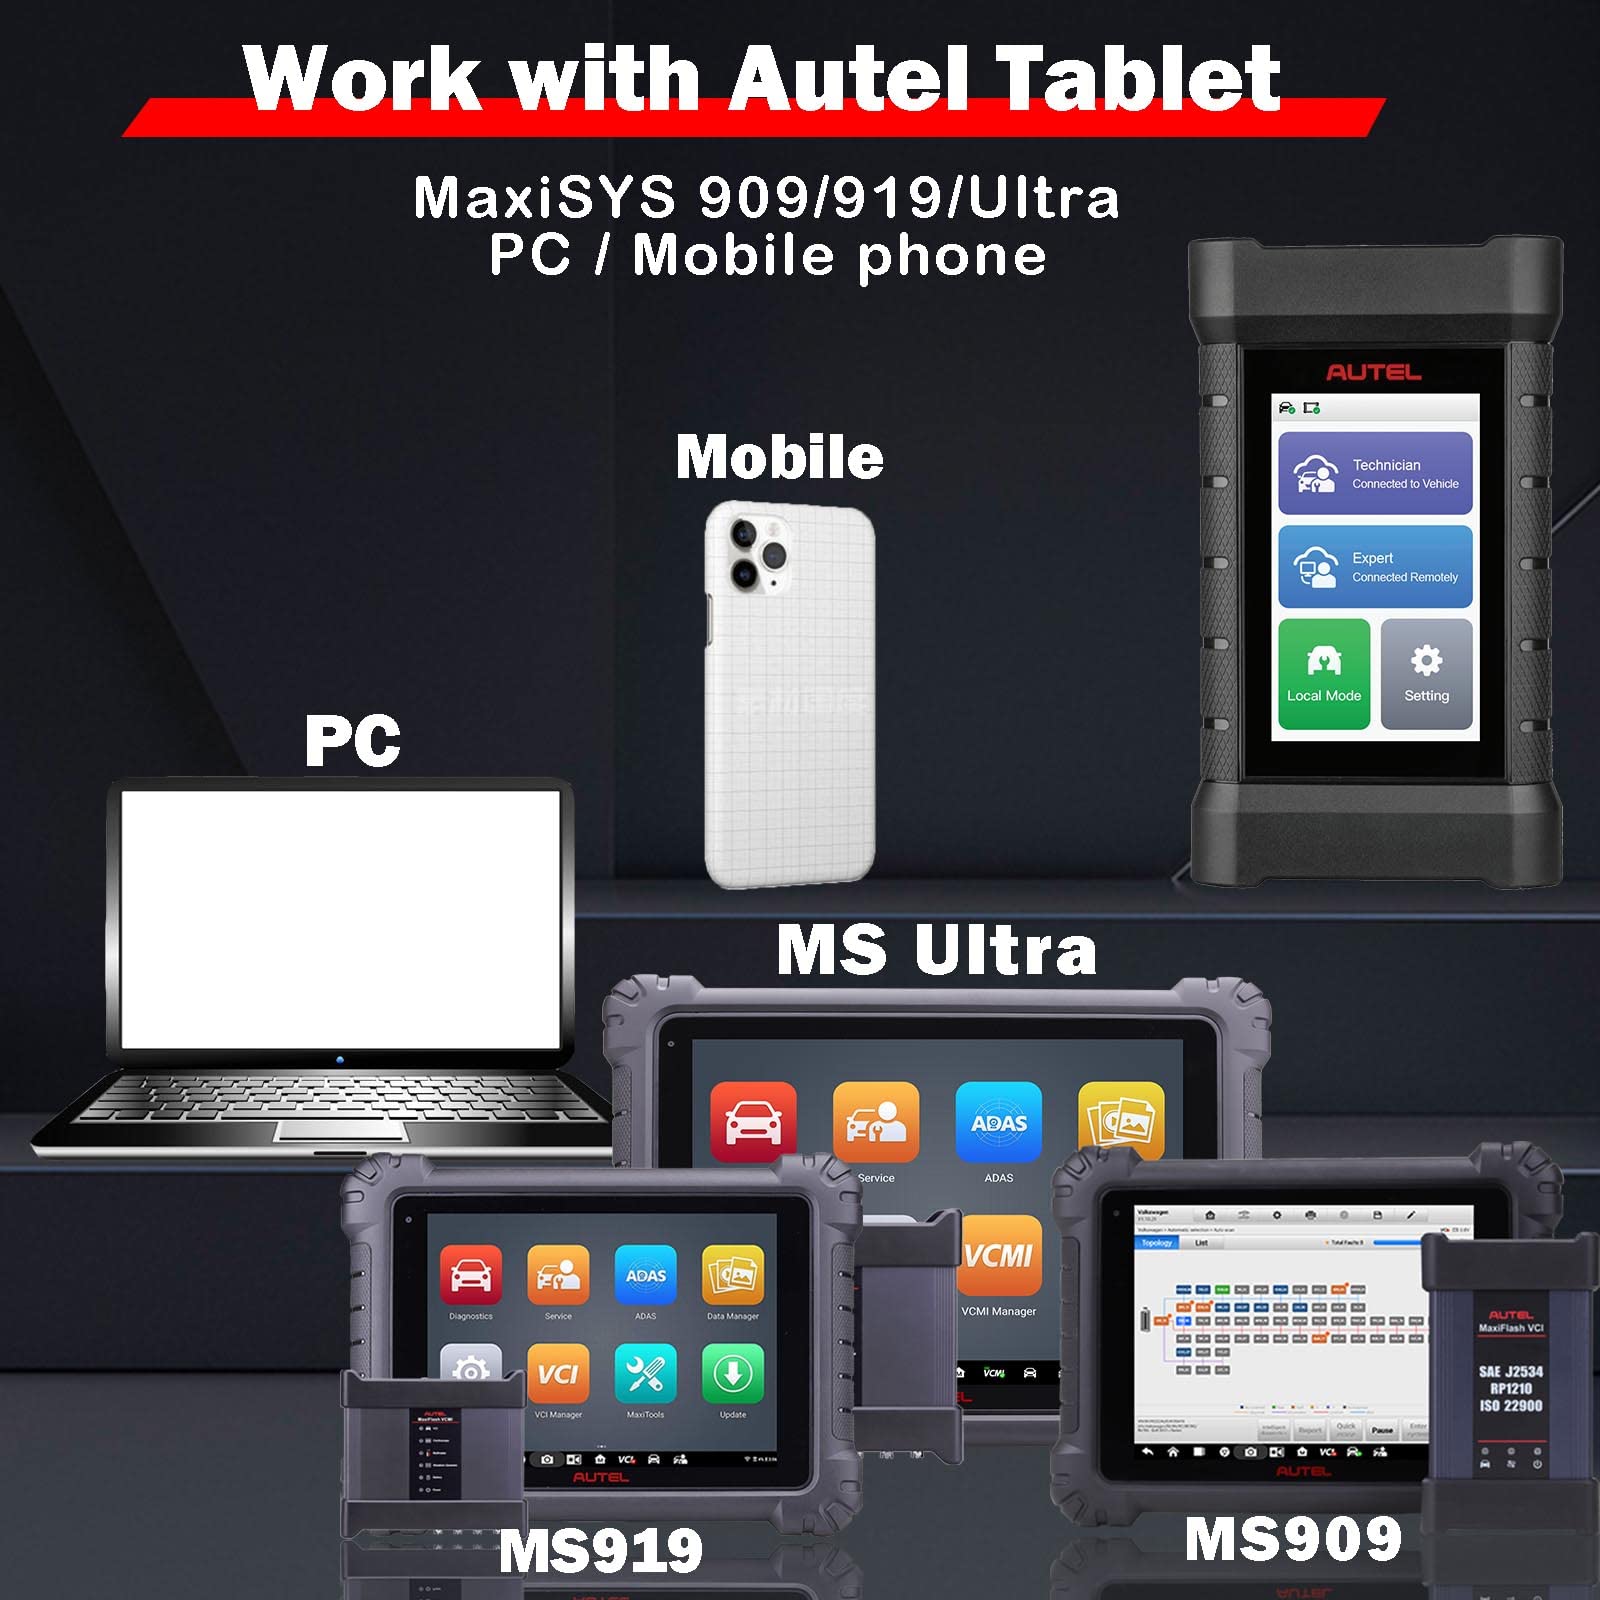 Autel VCI MaxiFlash Xlink J2534 Reprogramming Tool Expert-Driven Remote Diagnostic Tool Supports DoIP/CAN/CAN FD/D-PDU/J2534/RP1210 Work with Autel MaxiSYS Ultra MS919 MS909 PC and Mobile Phone